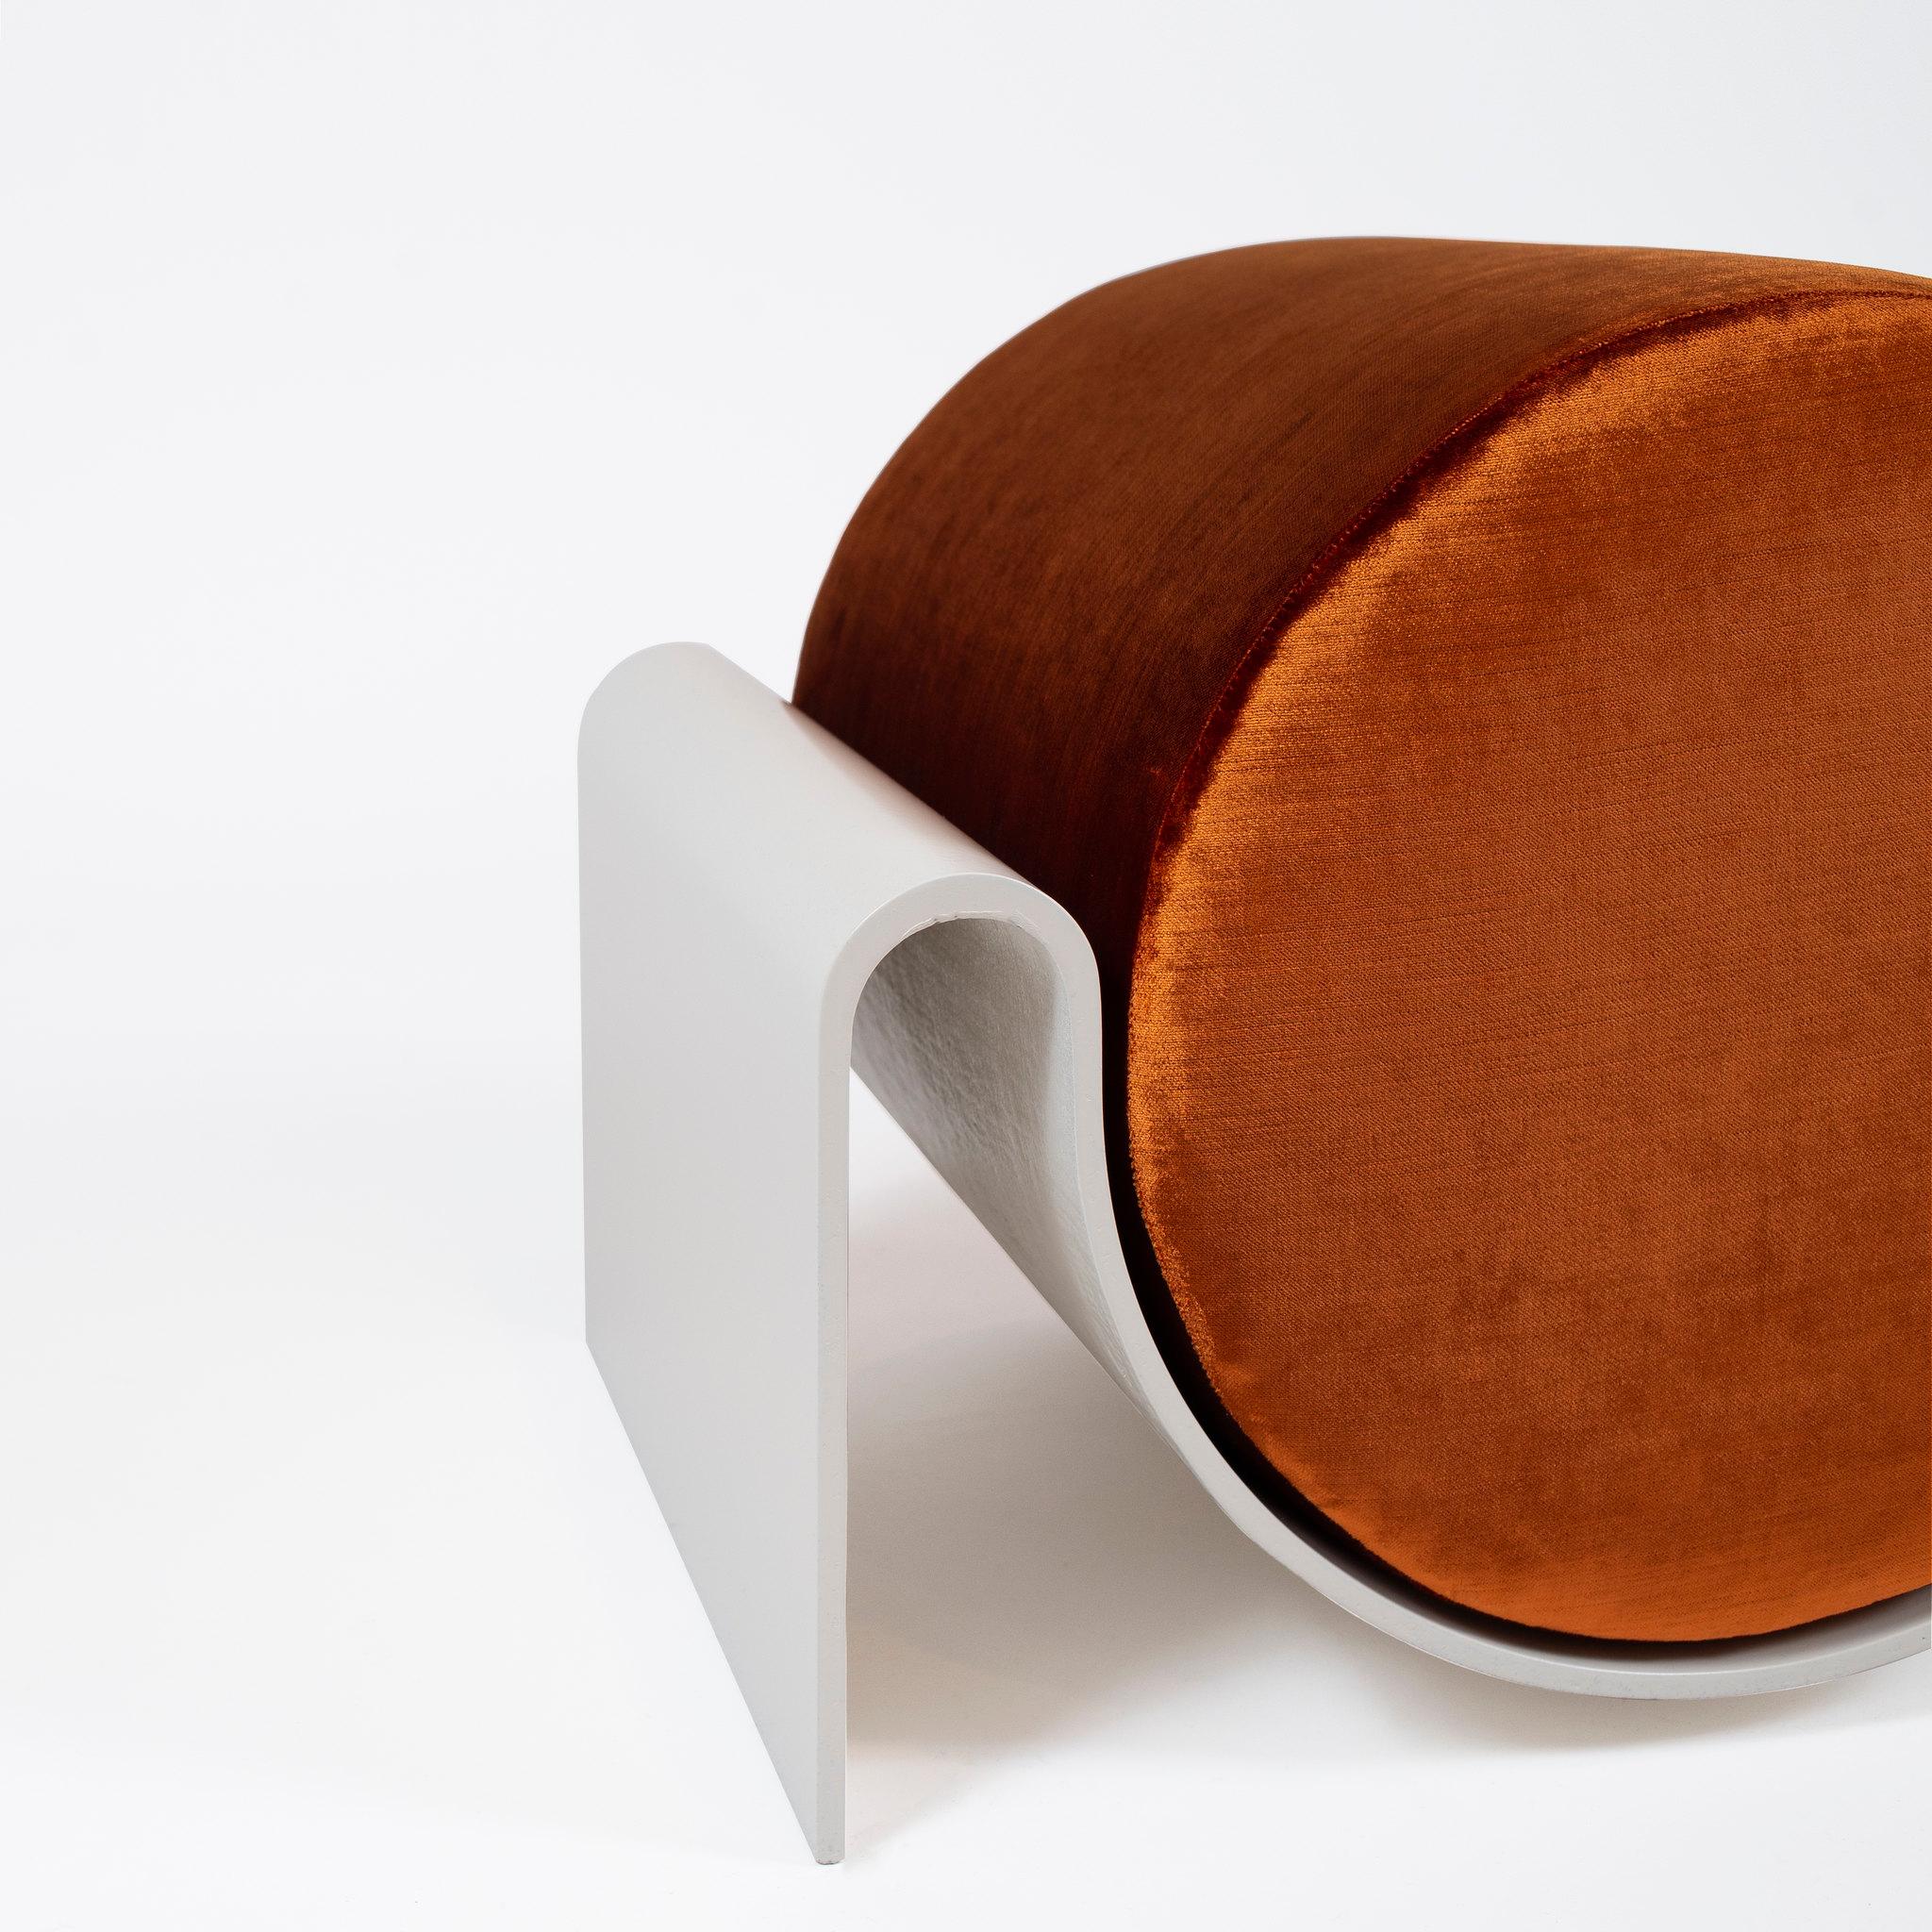 Asa Pingree’s slinky, singular fiberglass creations are a direct reflection of the designer’s penchant for clean lines and lightweight structures. The stool is made of a lightweight fiberglass composite with a molded gel coat surface that is